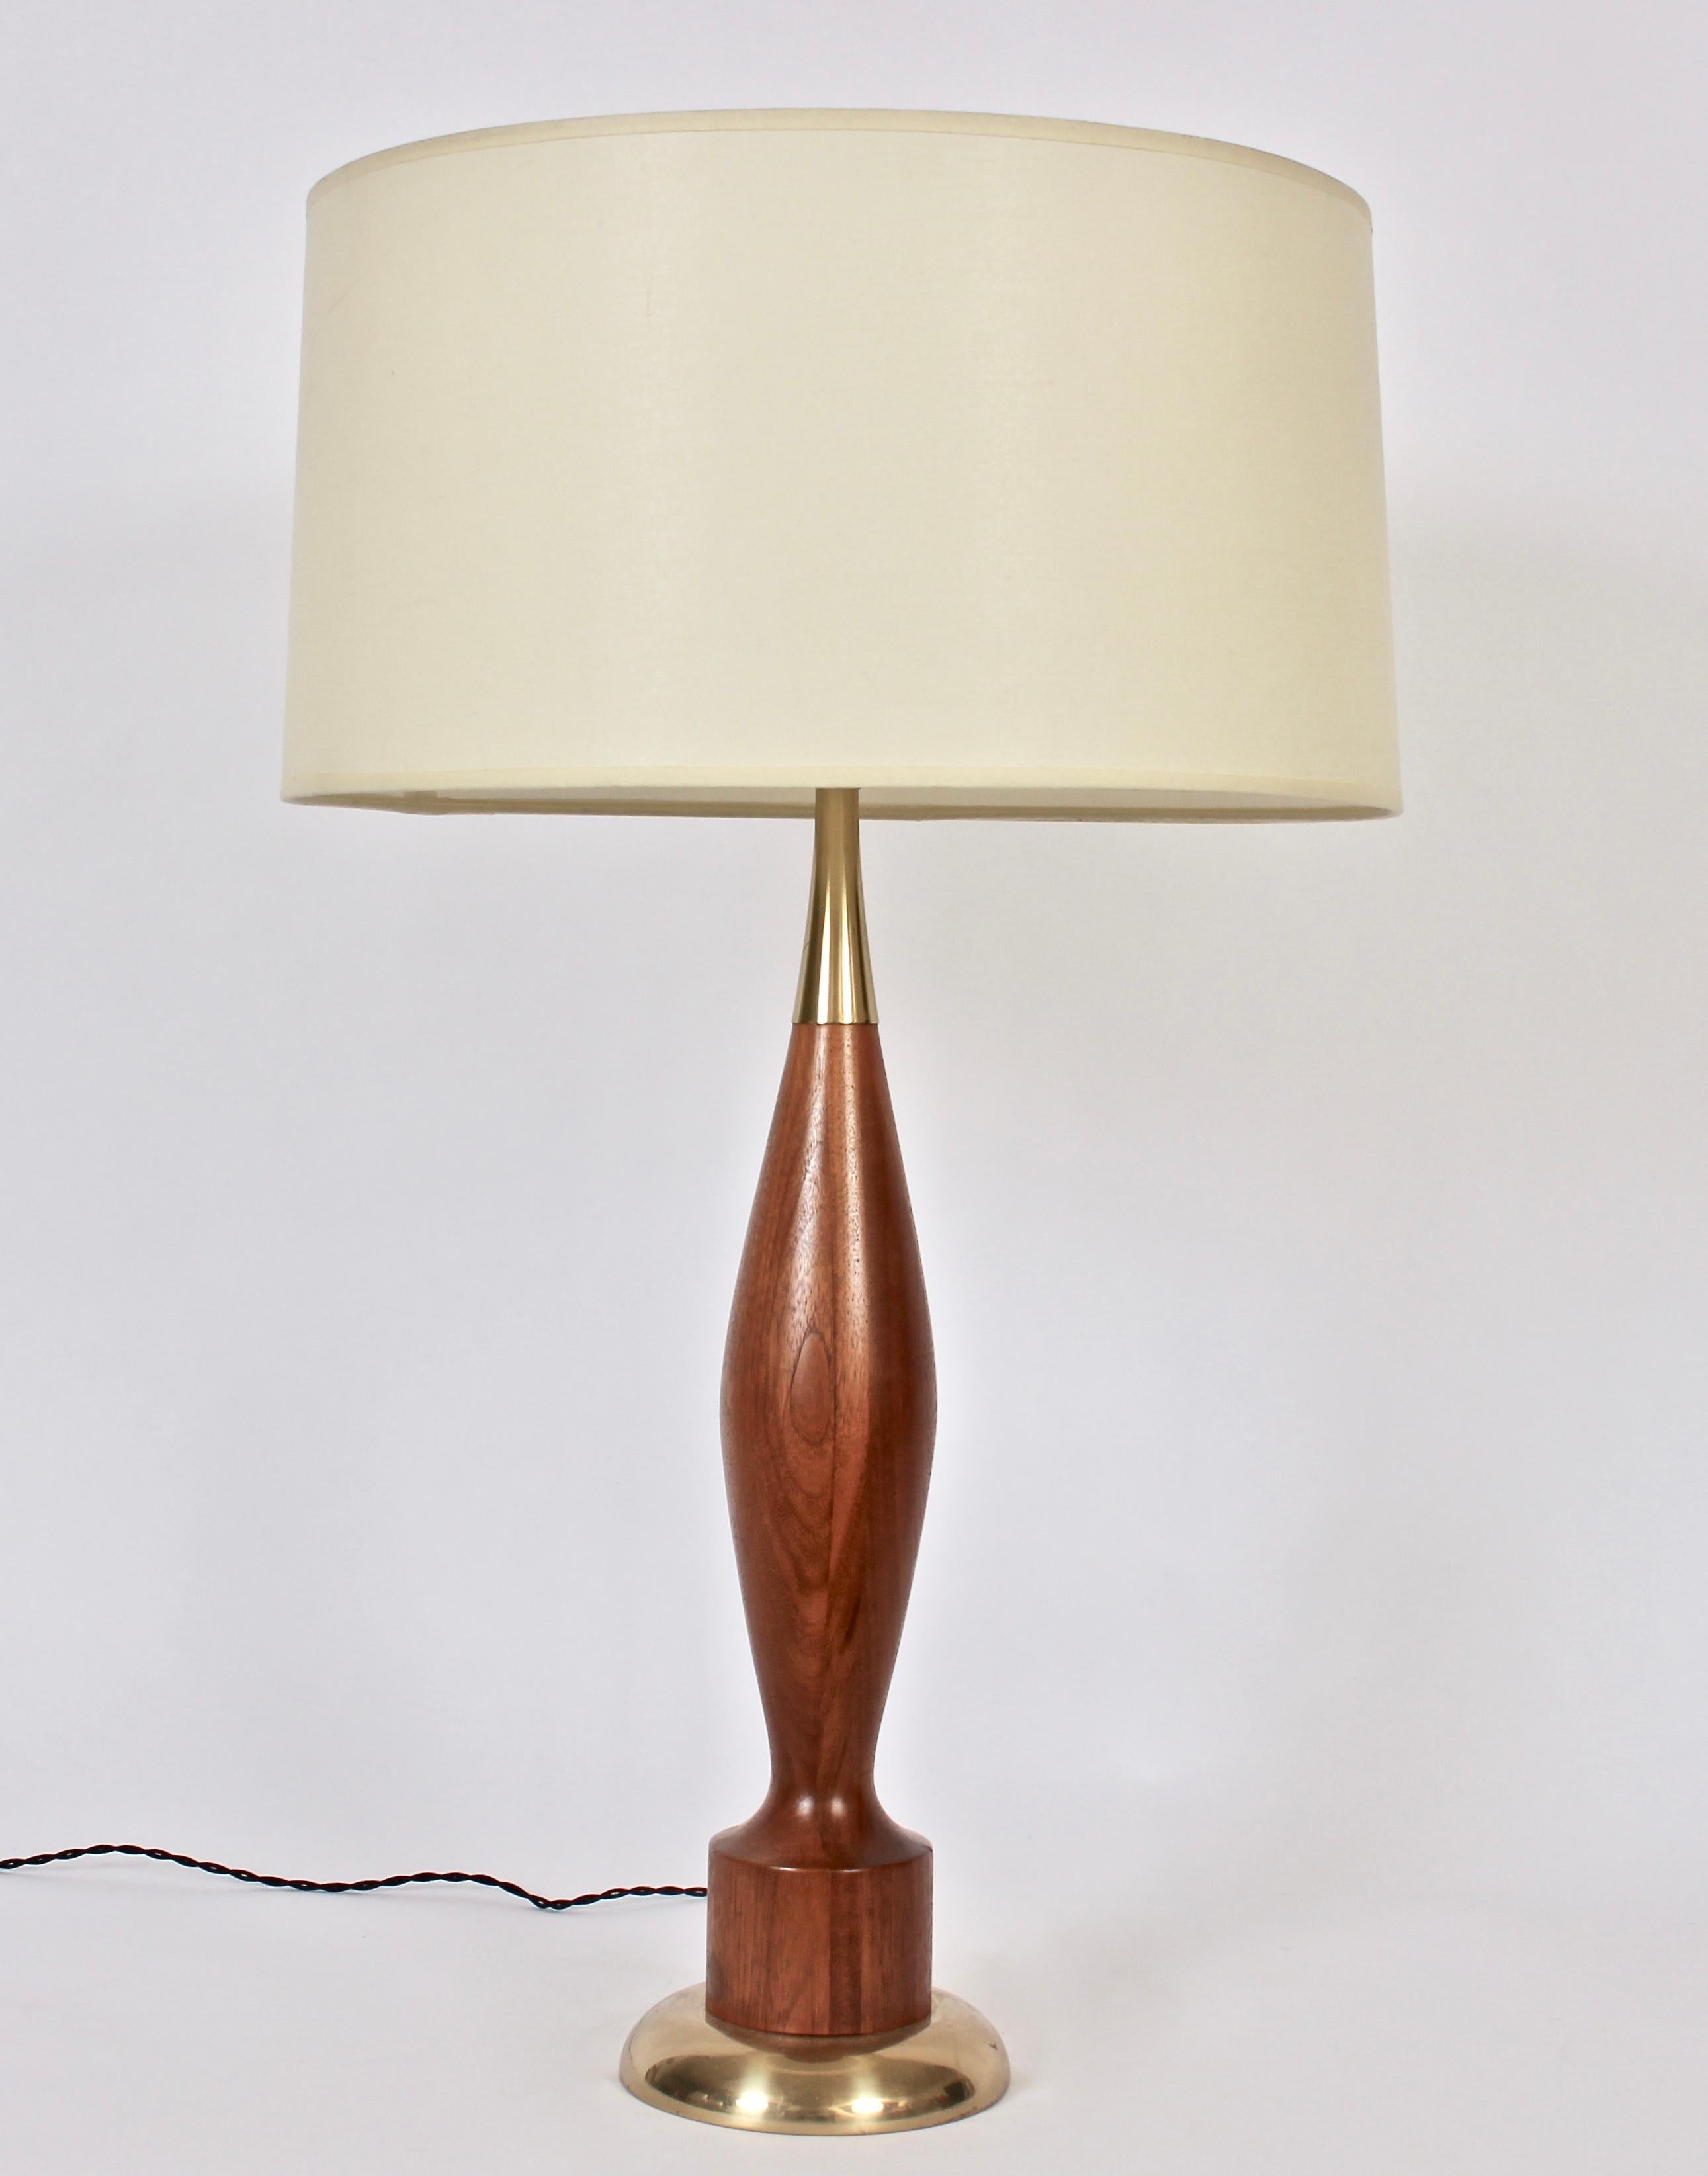 Tall Tony Paul for Westwood Industries Style Turned Walnut & Brass Table Lamp In Good Condition For Sale In Bainbridge, NY